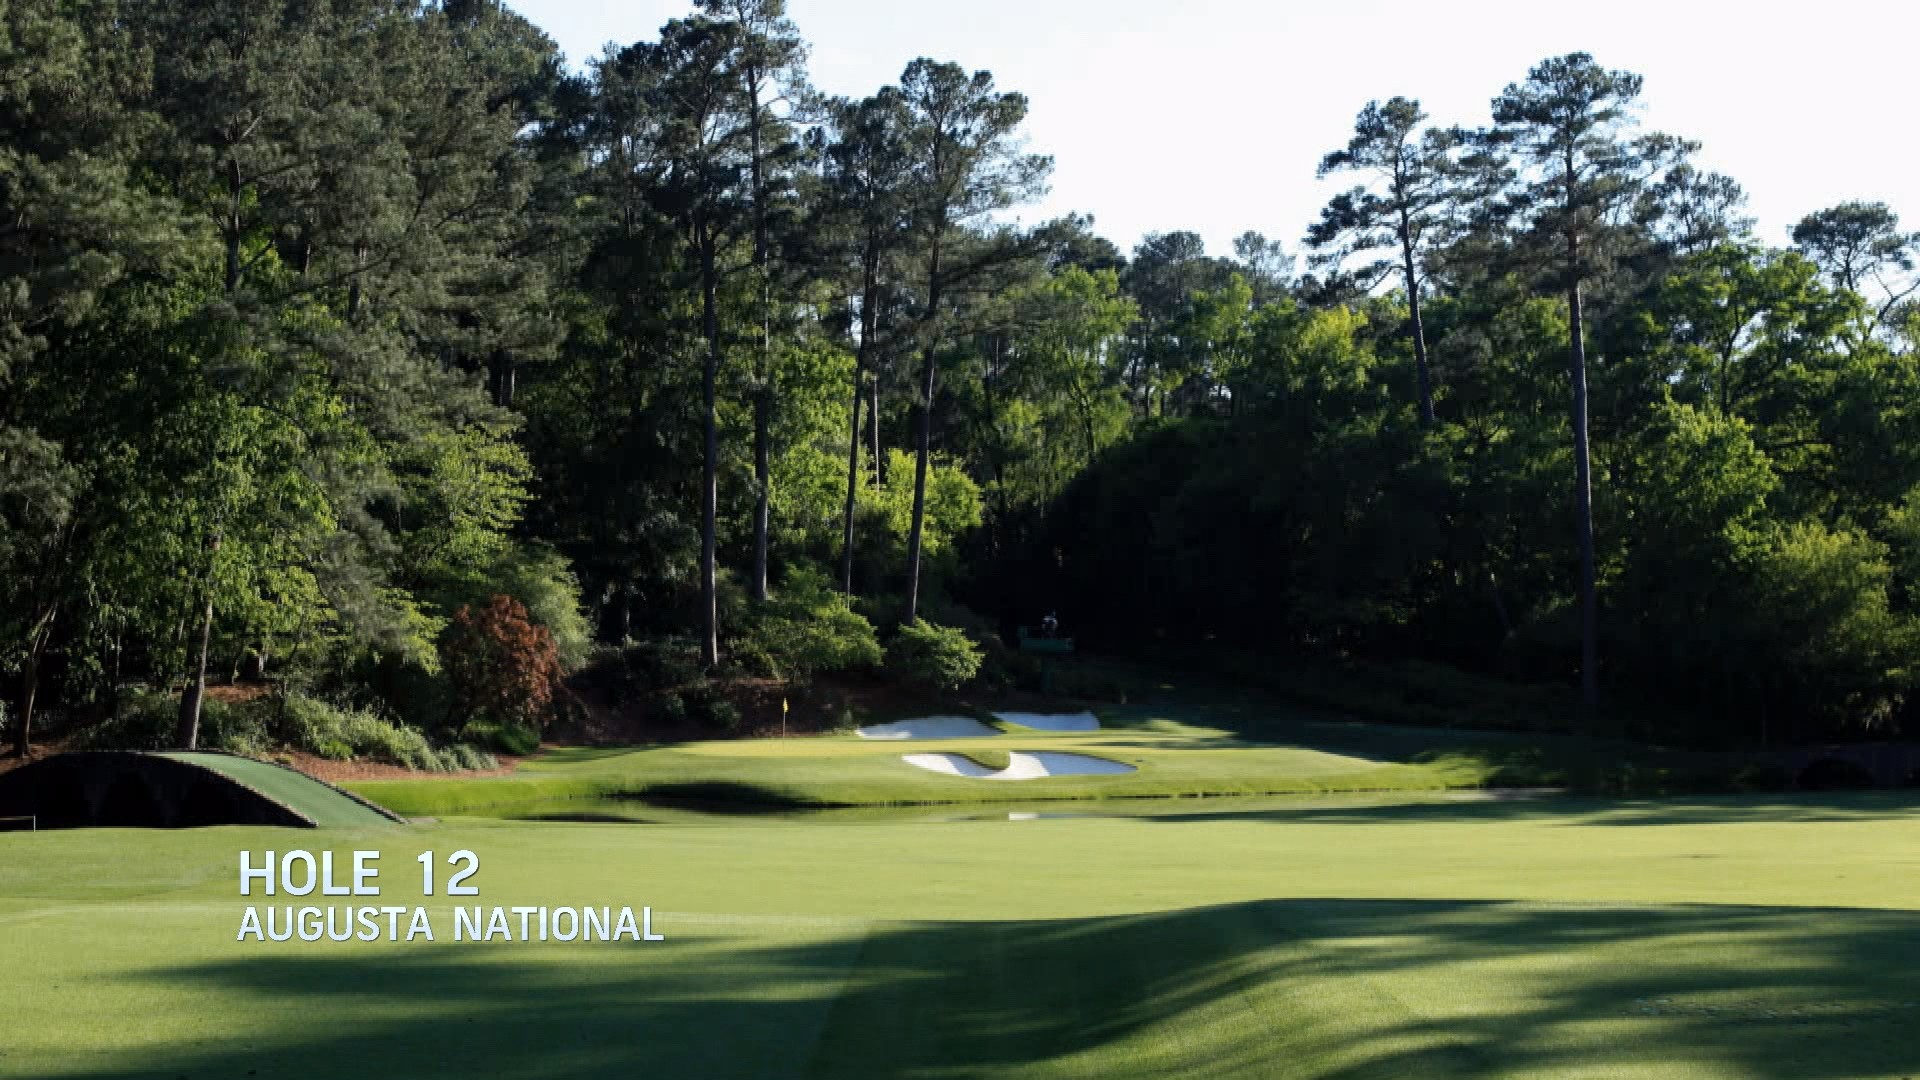 Triple terrors: No. 12 and other great par 3s